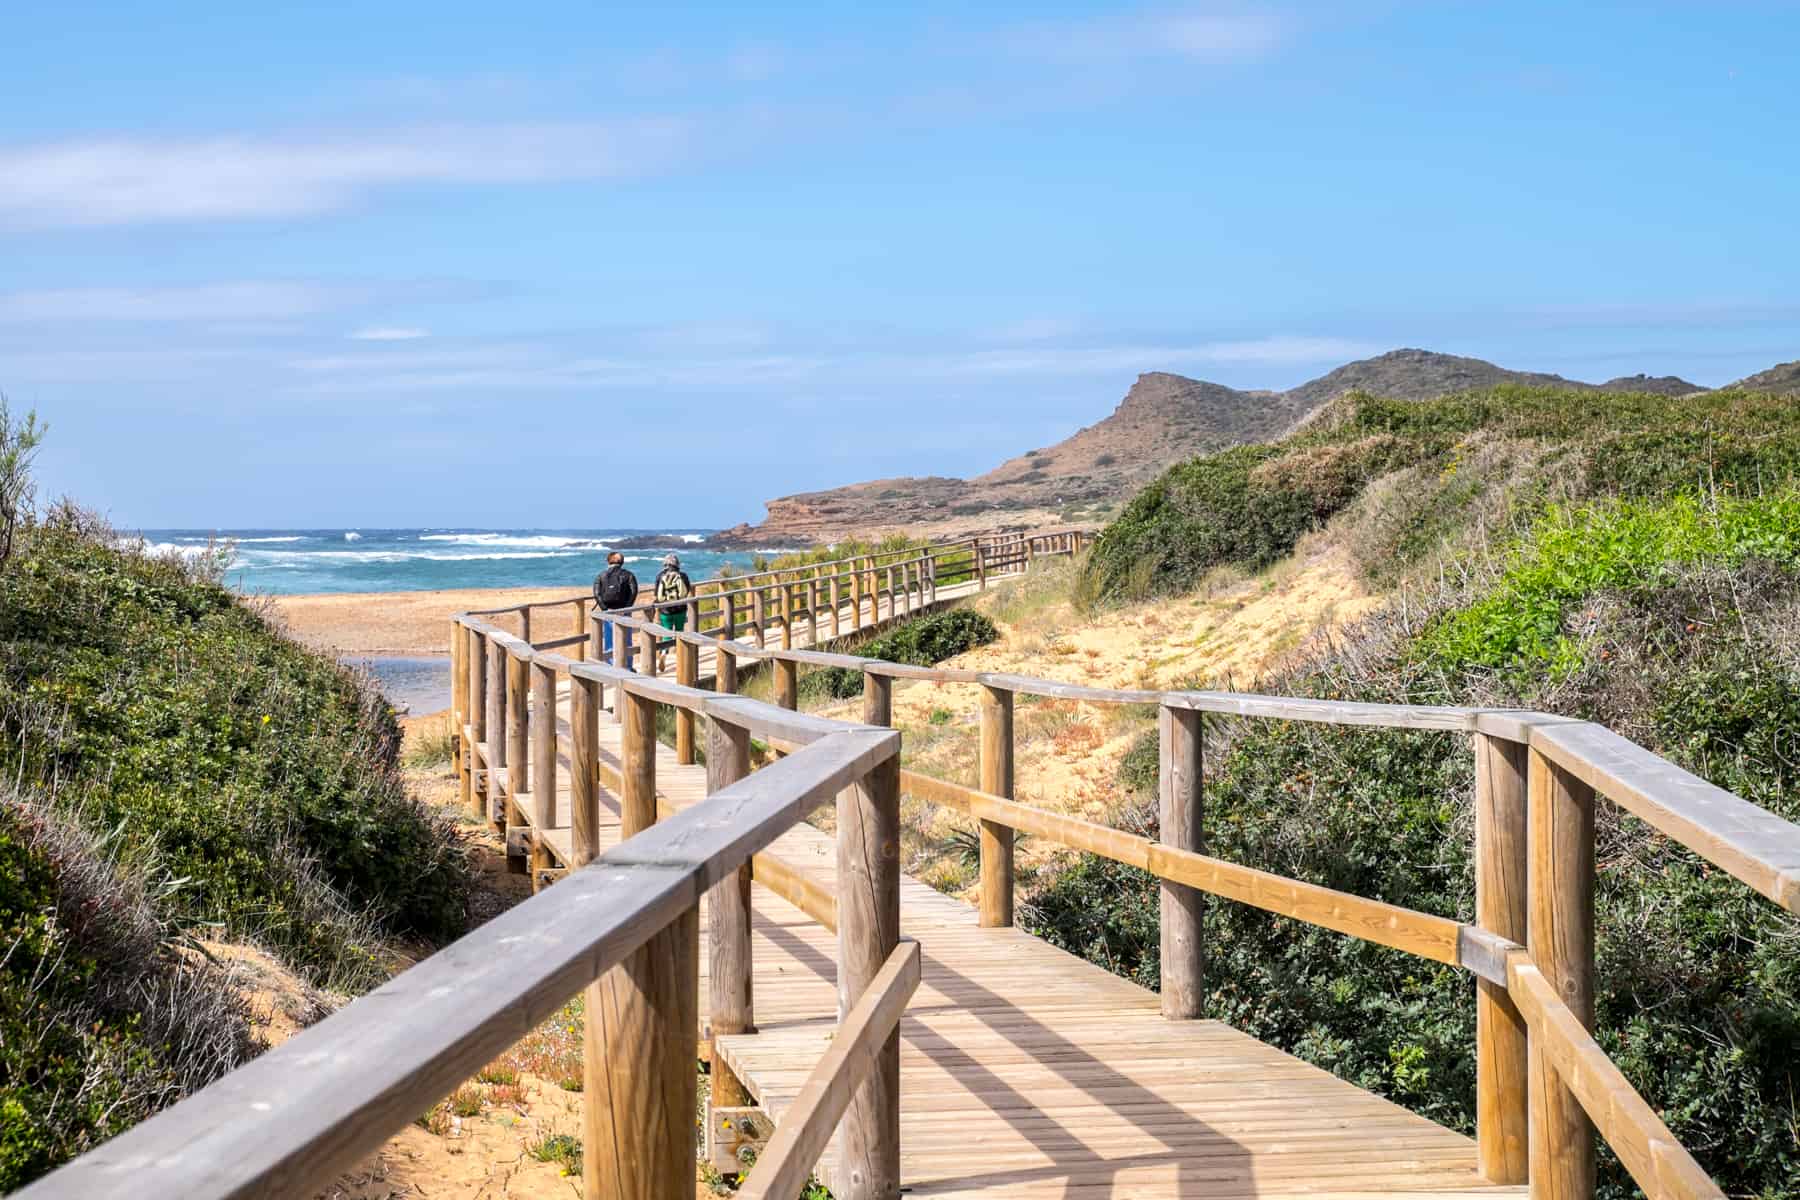 Two people walking the Cami de Cavalls in Menorca on an elevated wooden walkway over a yellow sand beach, backed by grassy hills. 